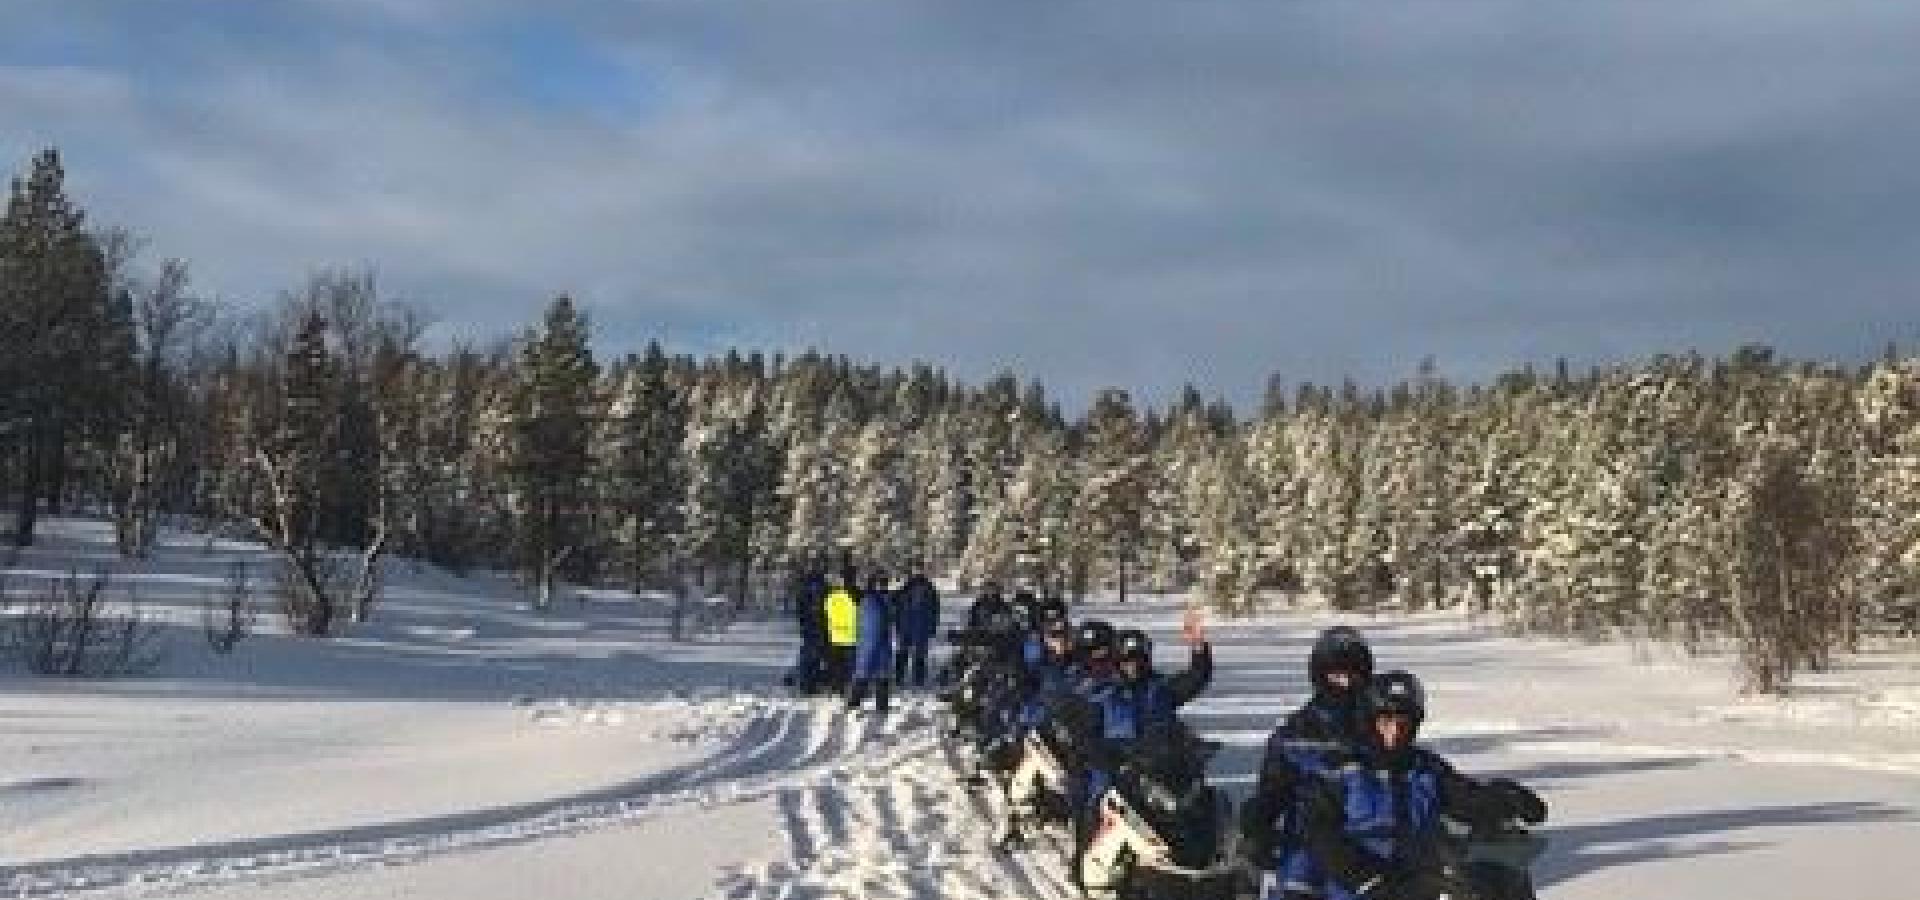 Winter activities in Skibotn - Snowmobile and dog sledding